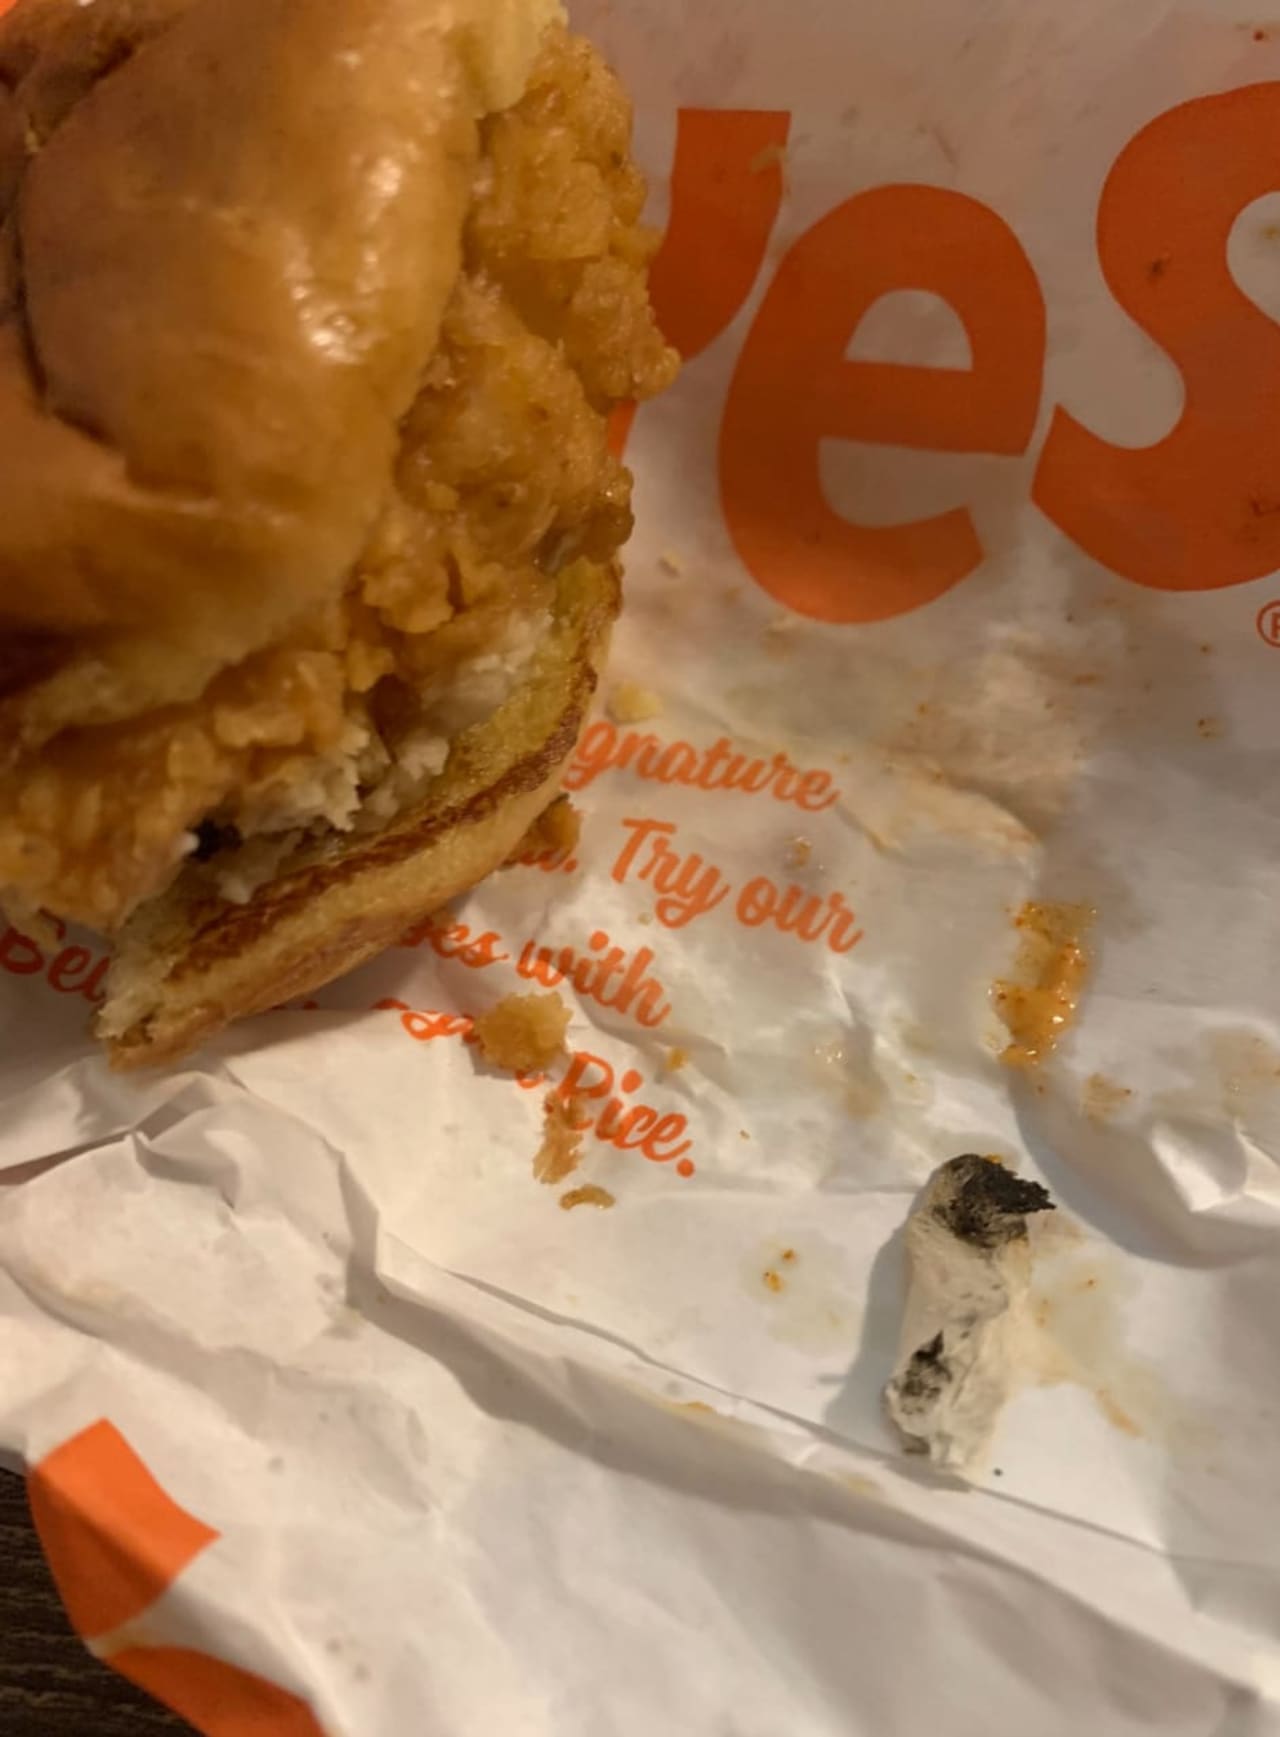 A man found a joint in his Popeye's Chicken Sandwich that came from a Manhattan location.